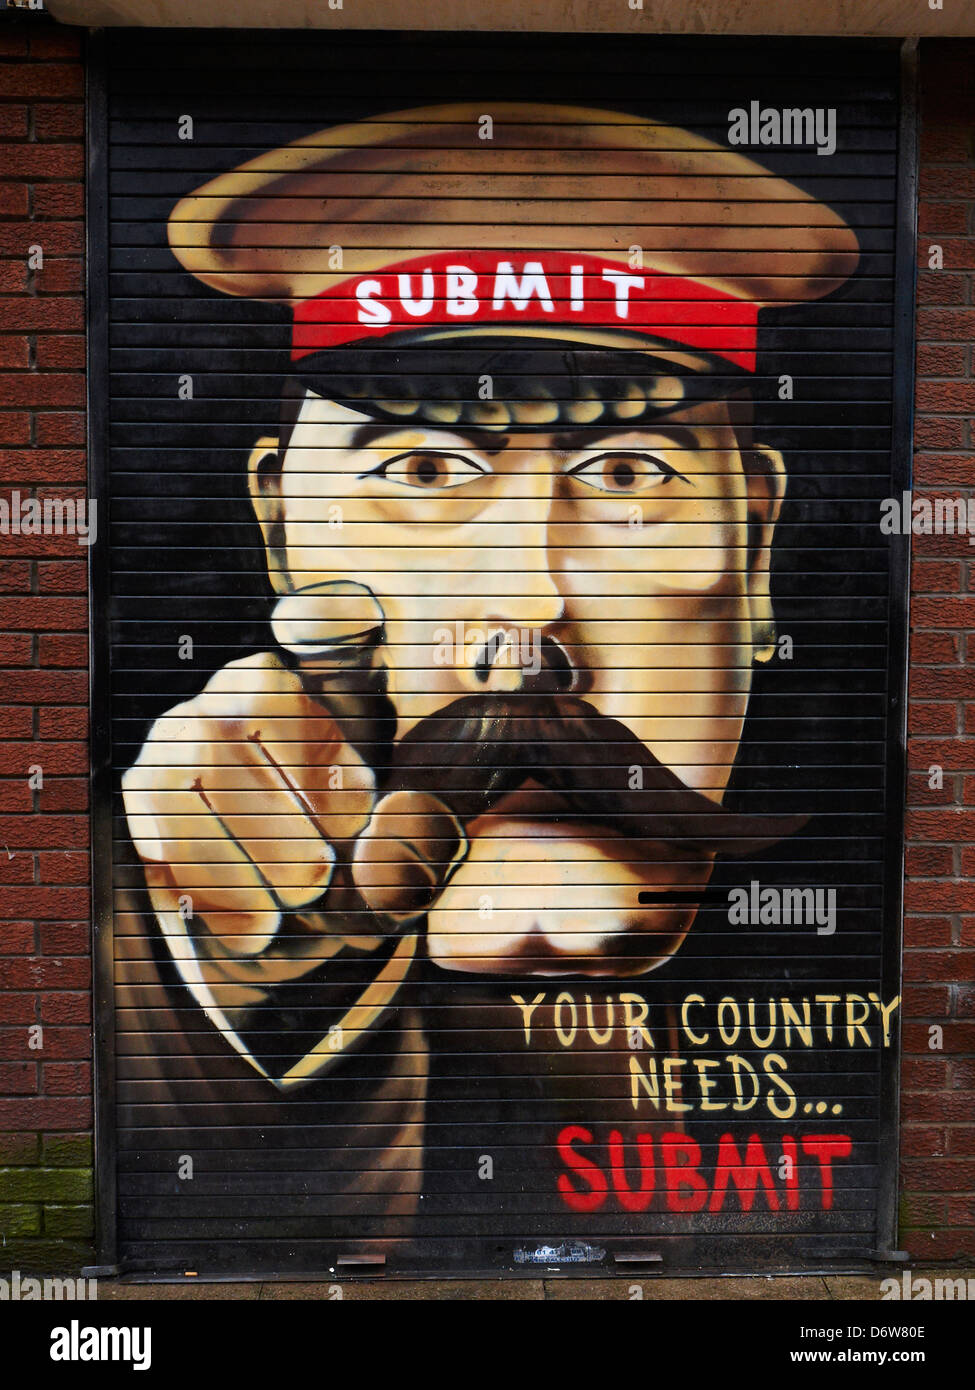 Your country needs...Submit. Shop advert in Manchester UK Stock Photo